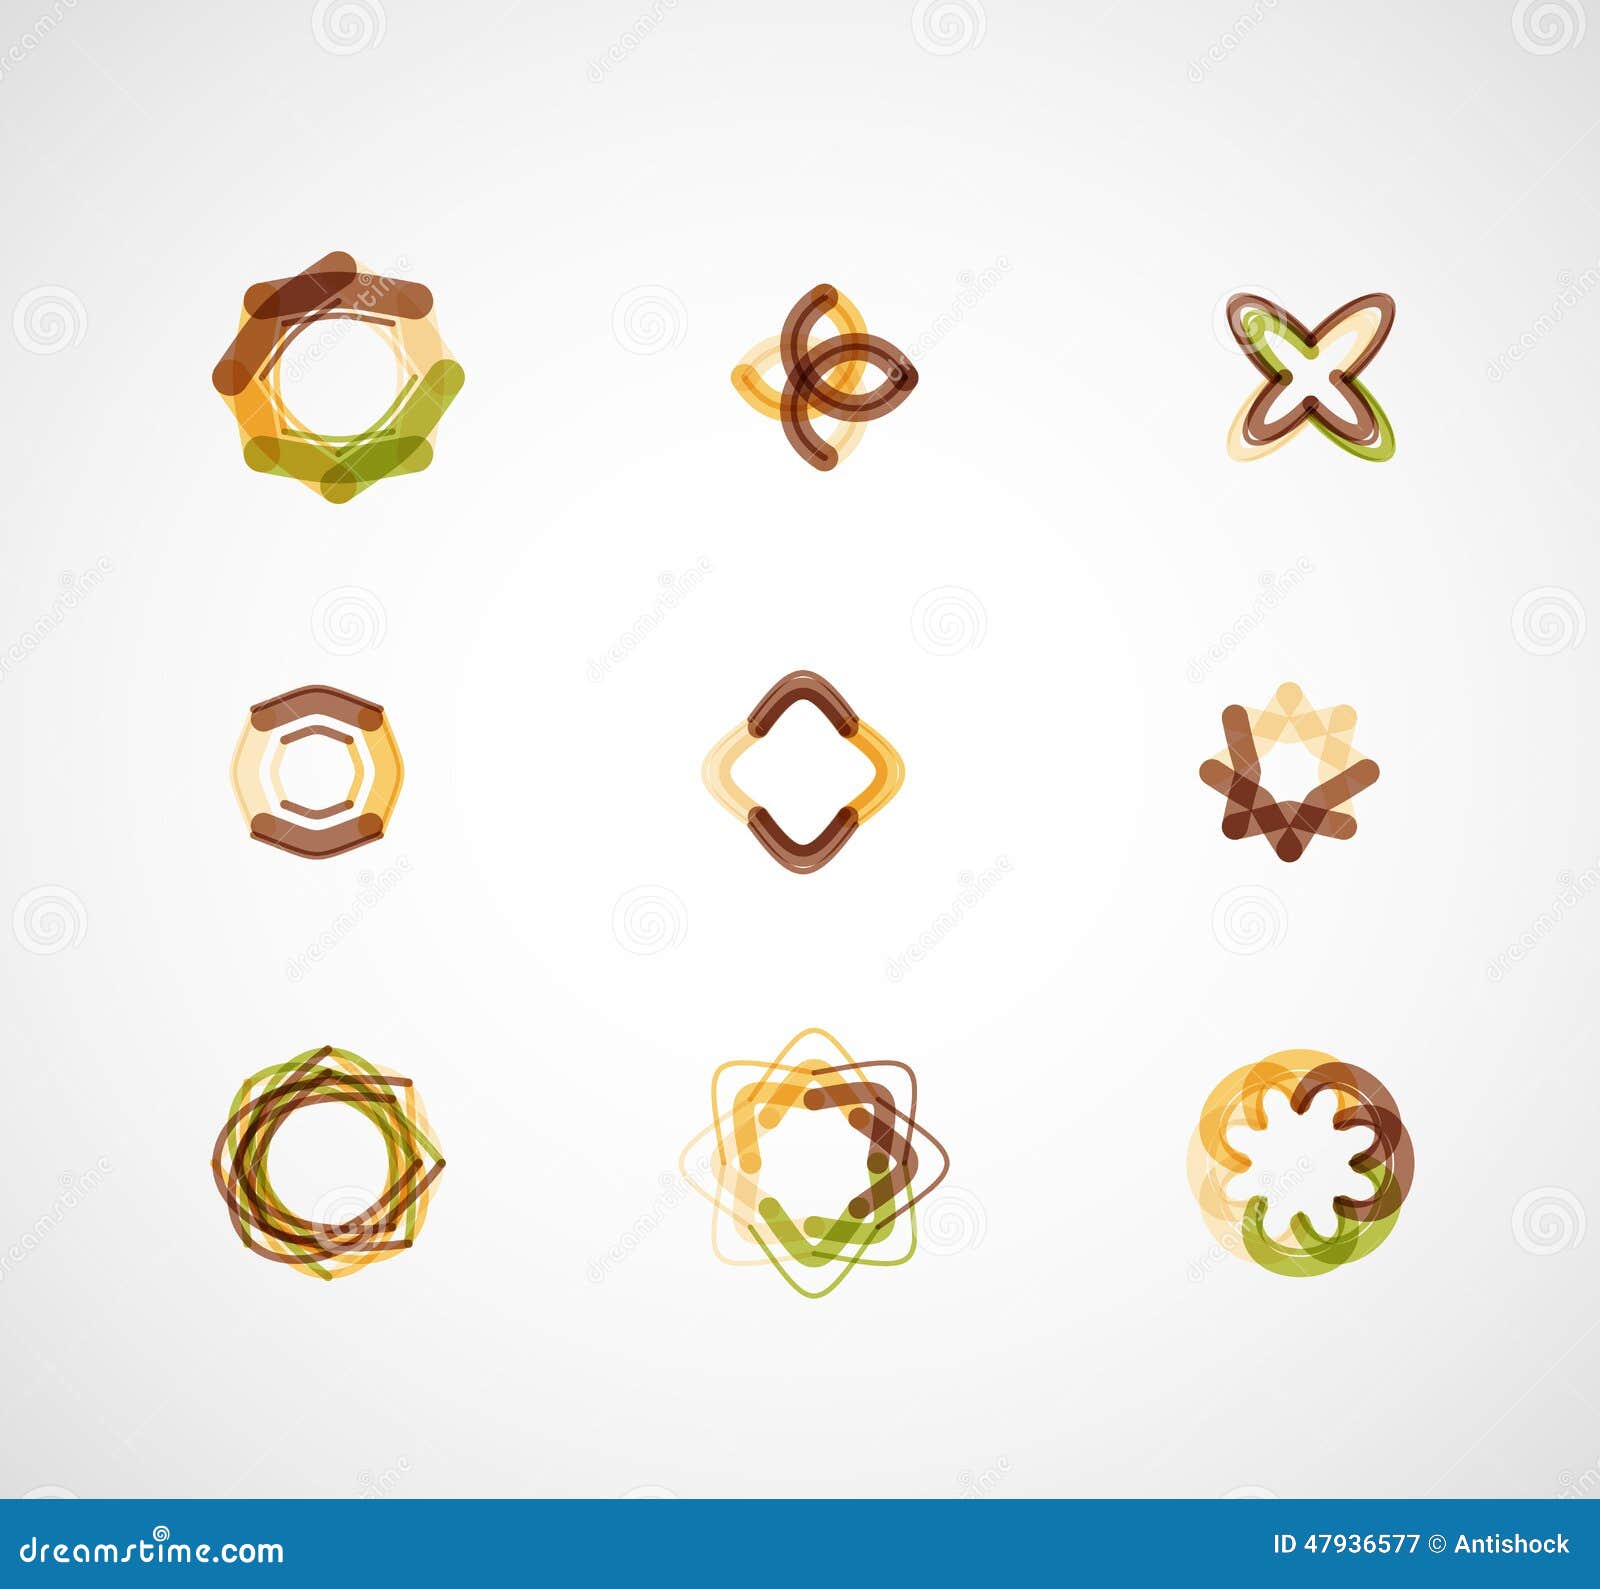 Abstract symmetric business icons. Abstract symmetric geometric shapes, 9 business icon logo set